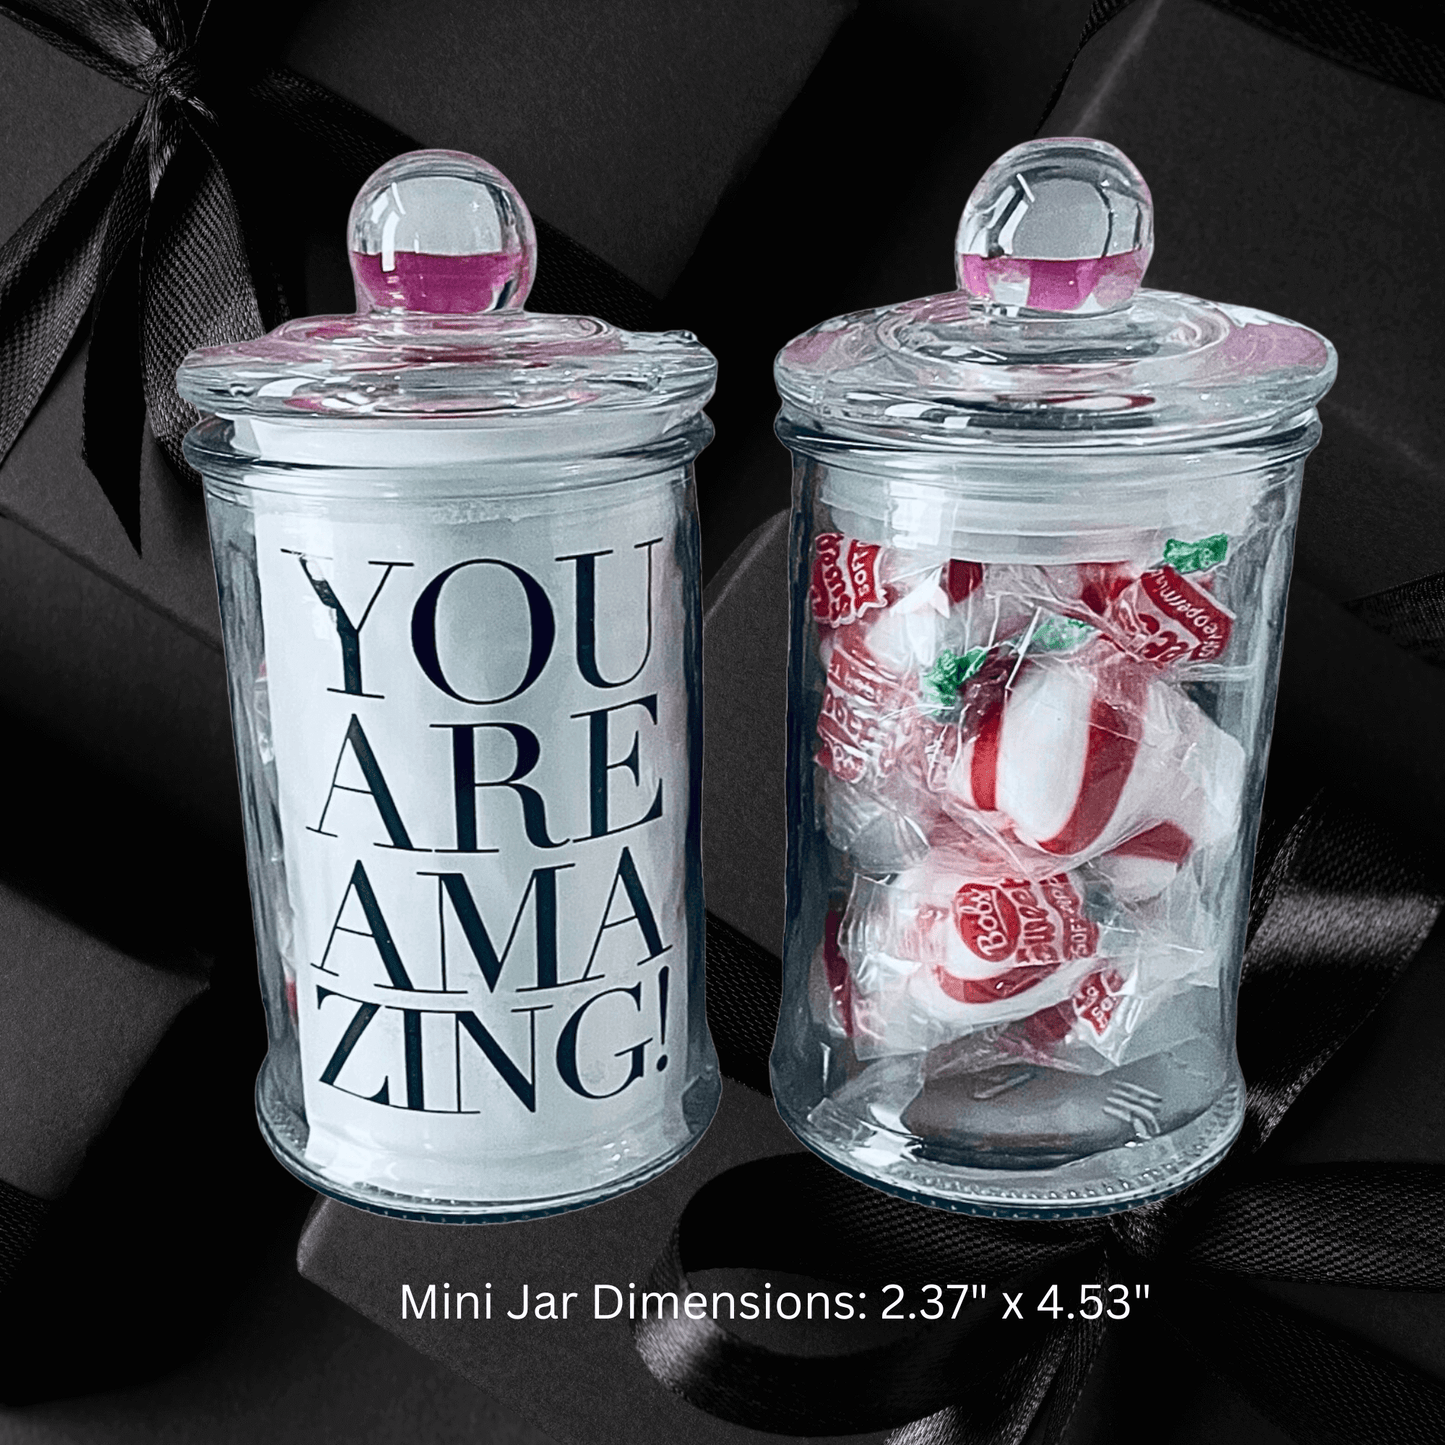 Peppermint candy in clear jars with "You are amazing!" message, presented in a decorative gift box.